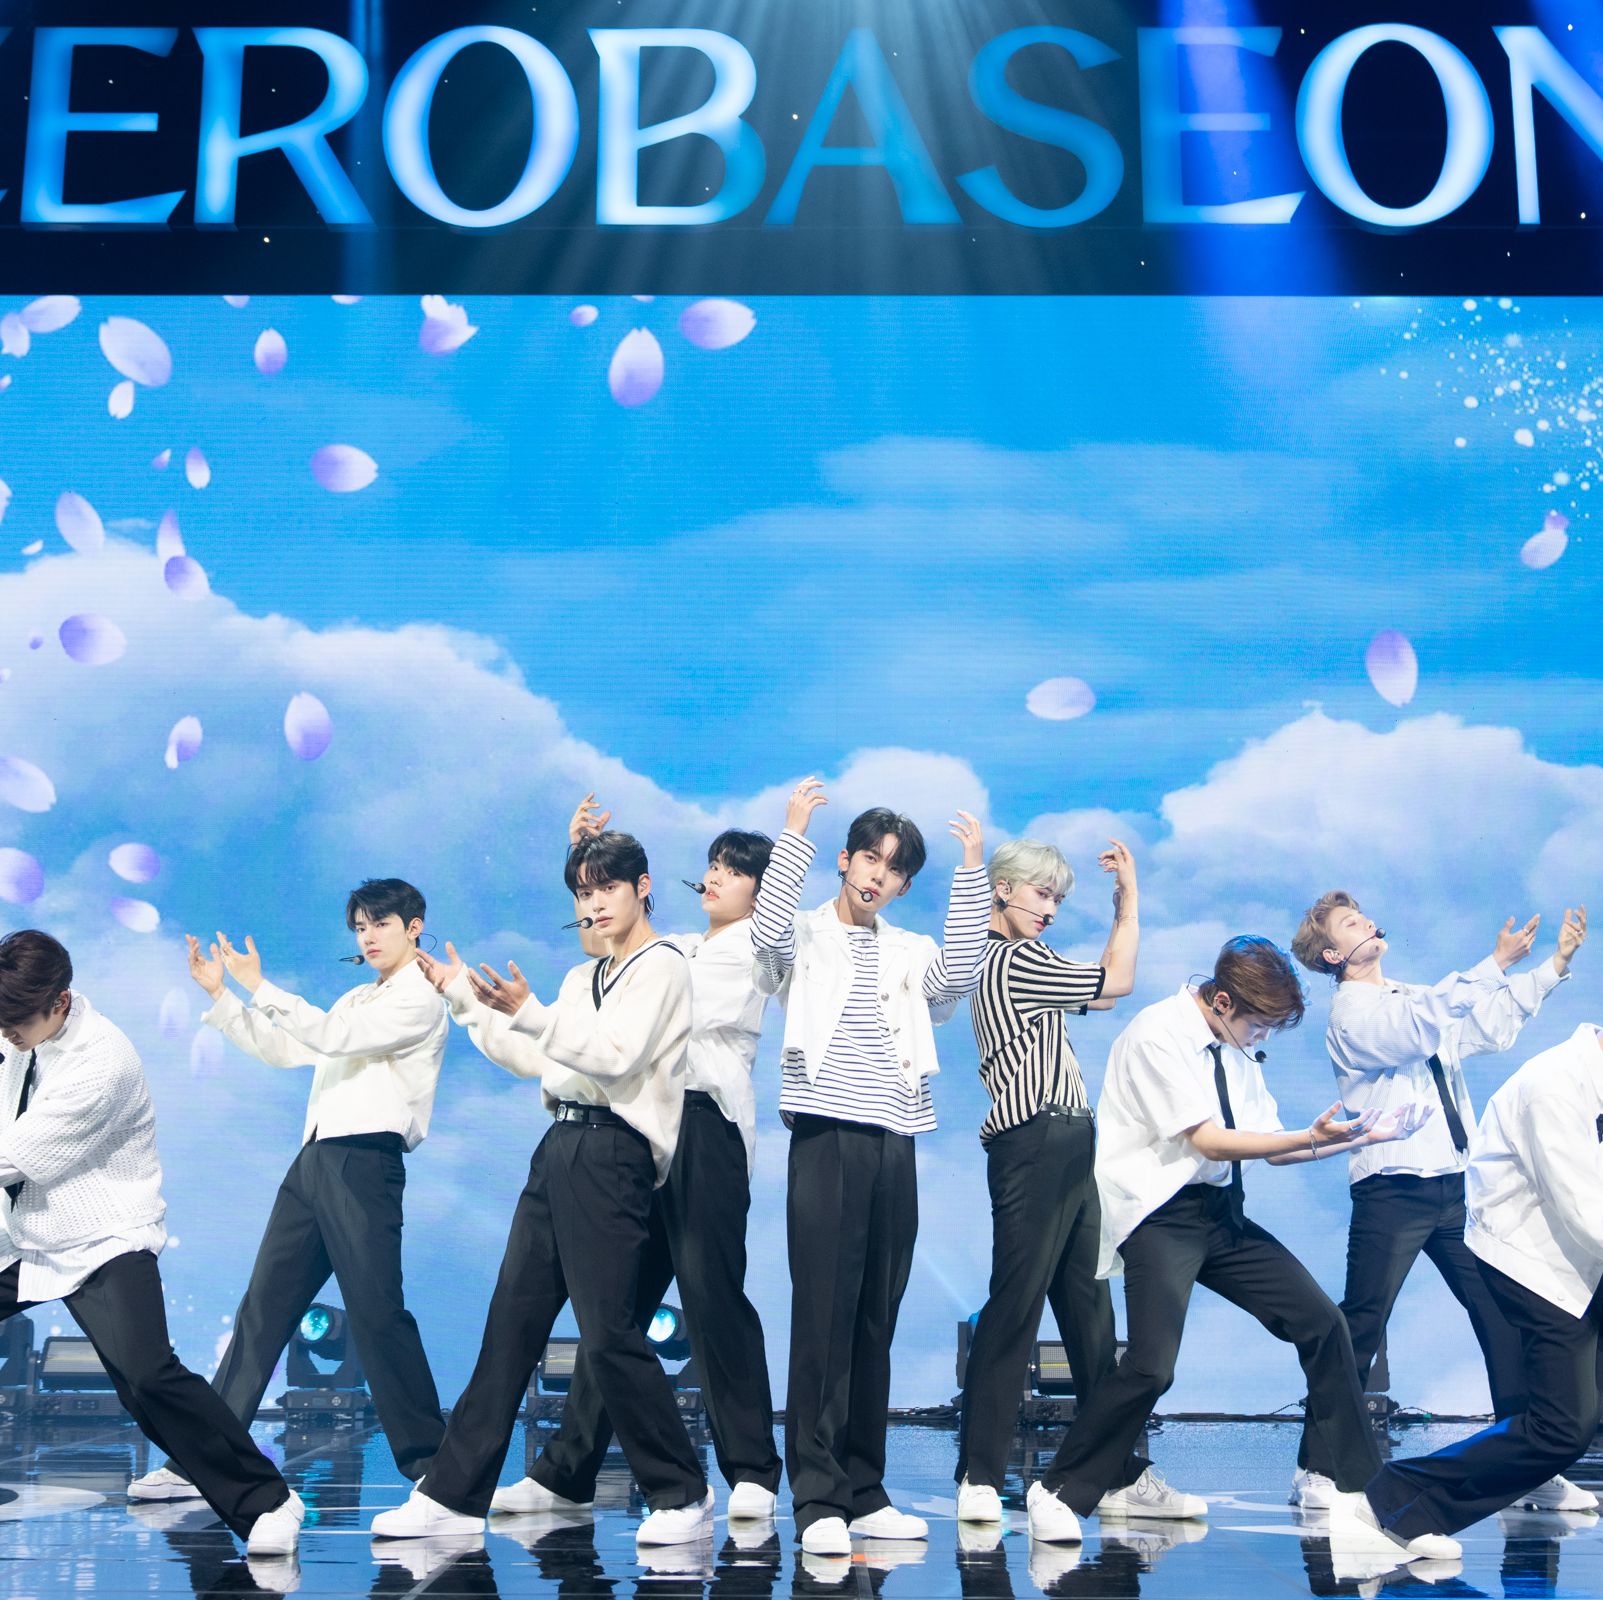 ZeroBaseOne, K-Pop's Fifth Generation It Boys, Know How Much You Love the 